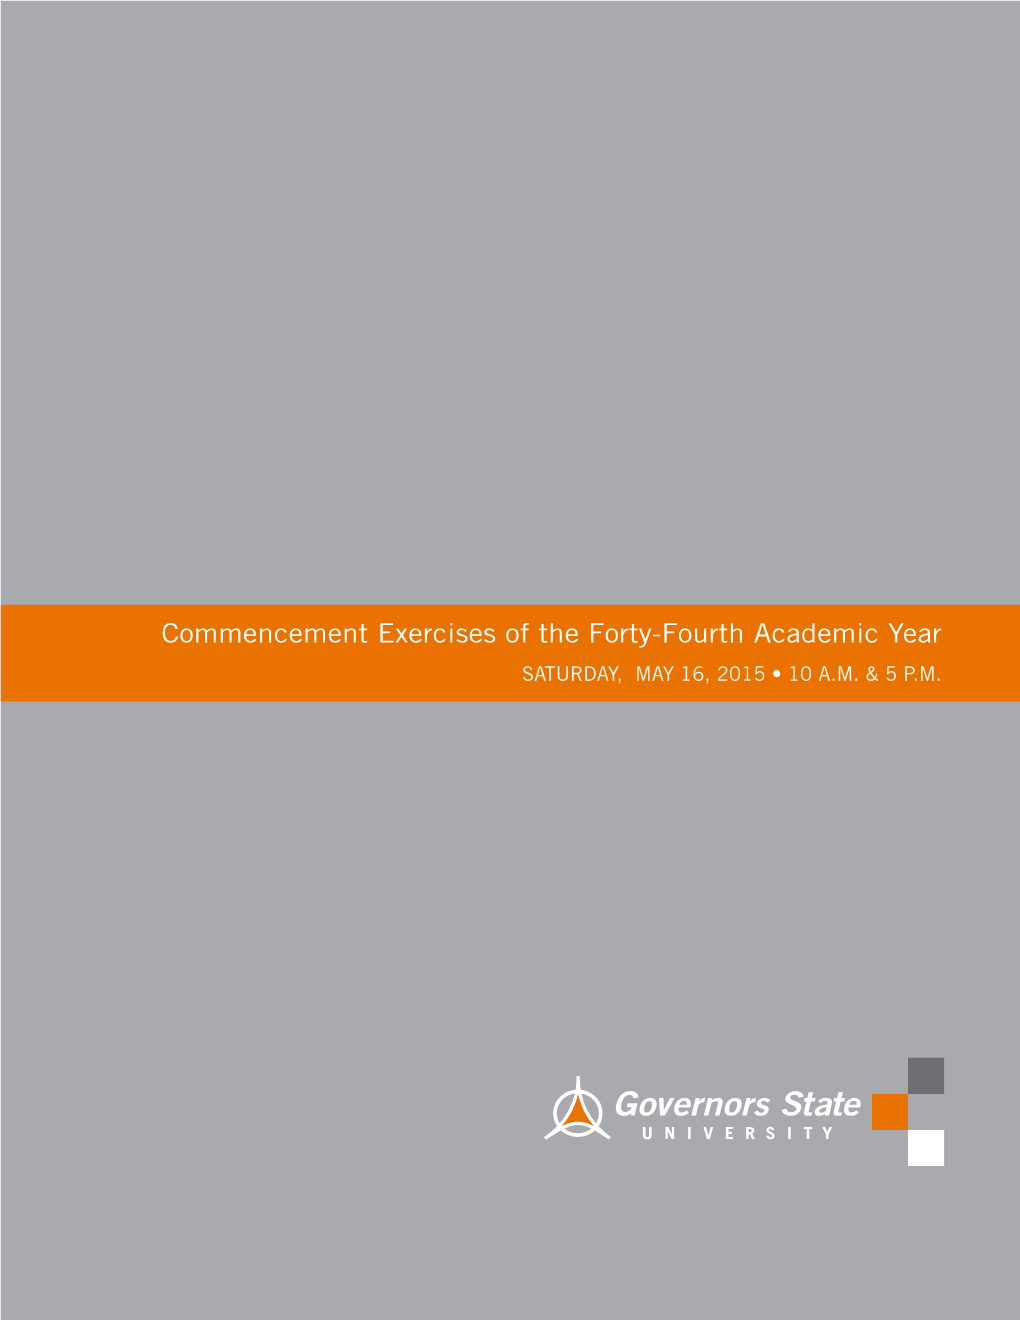 Commencement Exercises of the Forty-Fourth Academic Year SATURDAY, MAY 16, 2015 • 10 A.M